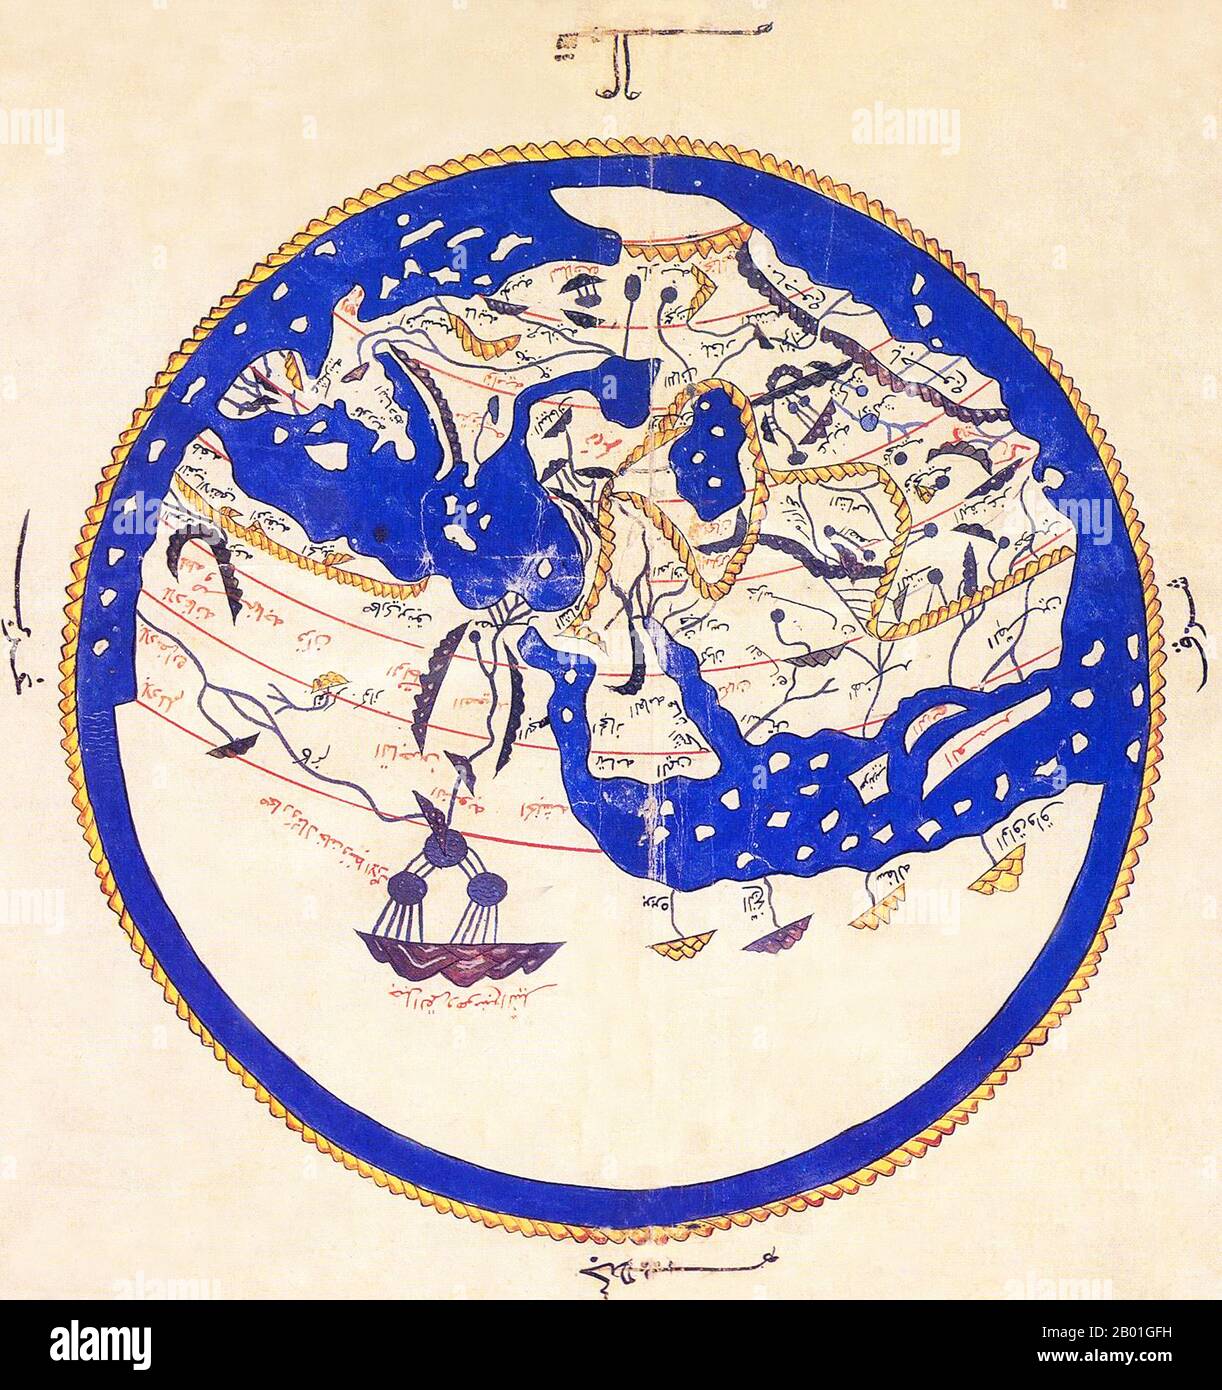 Italy/Morocco: Muhammad al-Idrisi's Map of the World, 1154 CE.  Abu Abd Allah Muhammad al-Idrisi al-Qurtubi al-Hasani al-Sabti or simply Al Idrisi (1099-1165/1166) was a Moroccan Muslim geographer, cartographer, Egyptologist and traveller who lived in Sicily, at the court of King Roger II. Muhammed al-Idrisi was born in Ceuta then belonging to the Almoravid Empire and died in Sicily. Al Idrisi was a descendant of the Idrisids, who in turn were descendants of Hasan bin Ali, the son of Ali and the grandson of the Islamic prophet Muhammad. Stock Photo